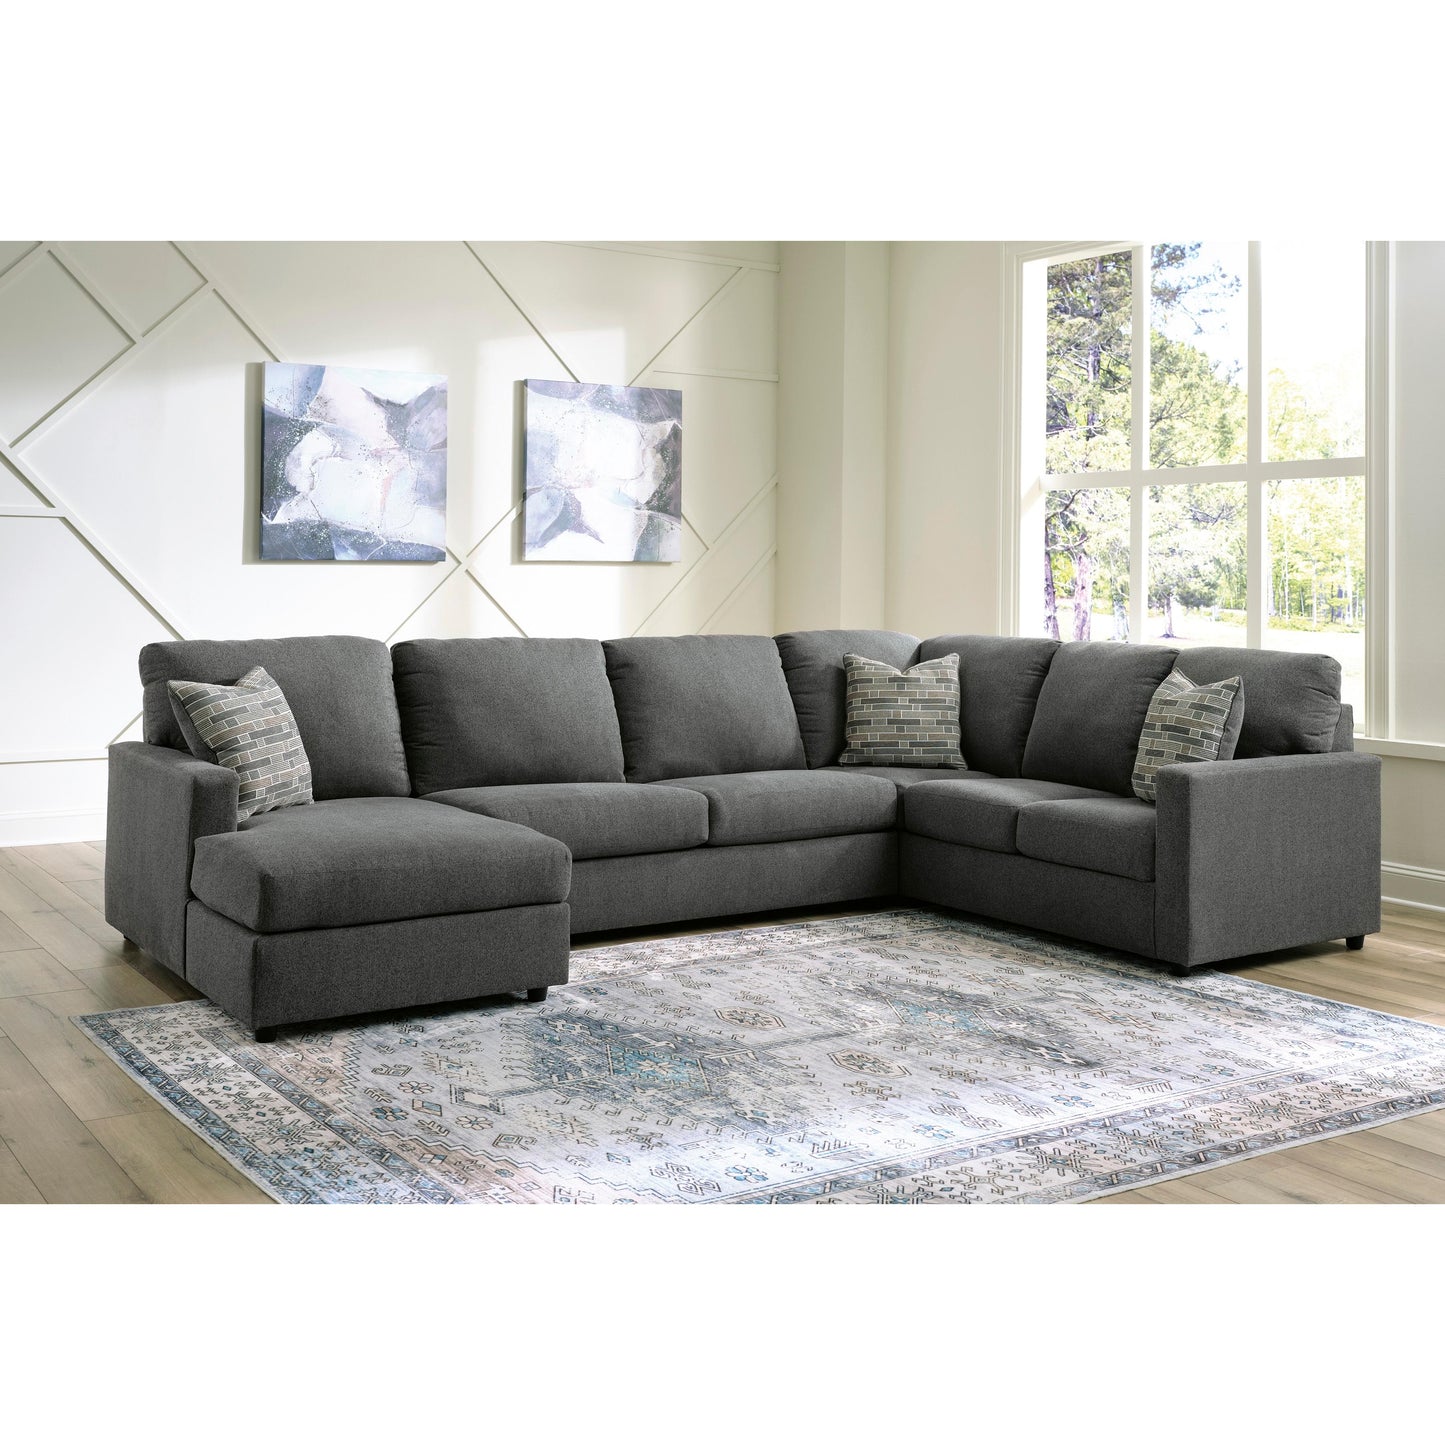 Signature Design by Ashley Edenfield Fabric 3 pc Sectional 2900316/2900334/2900349 IMAGE 3